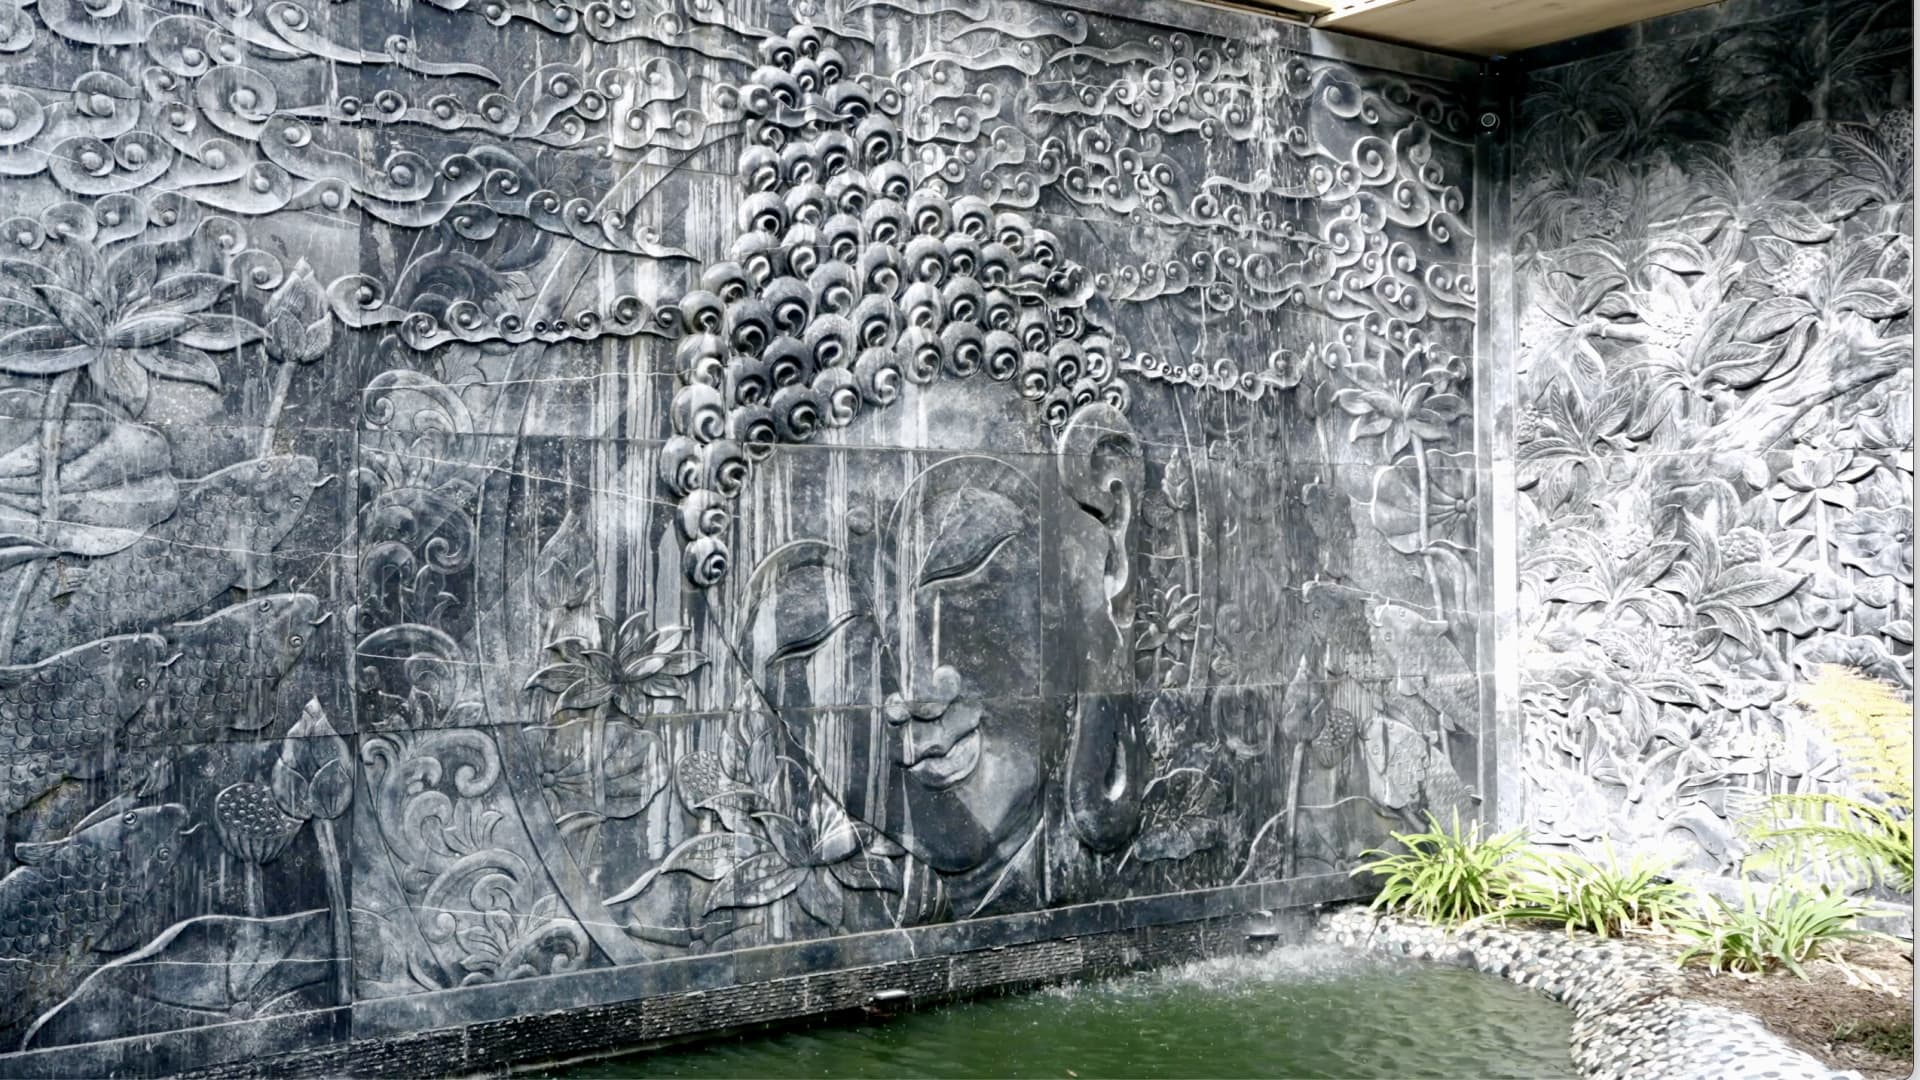 Water cascades down the courtyard's intricately carved Belgian bluestone wall into the koi pond.